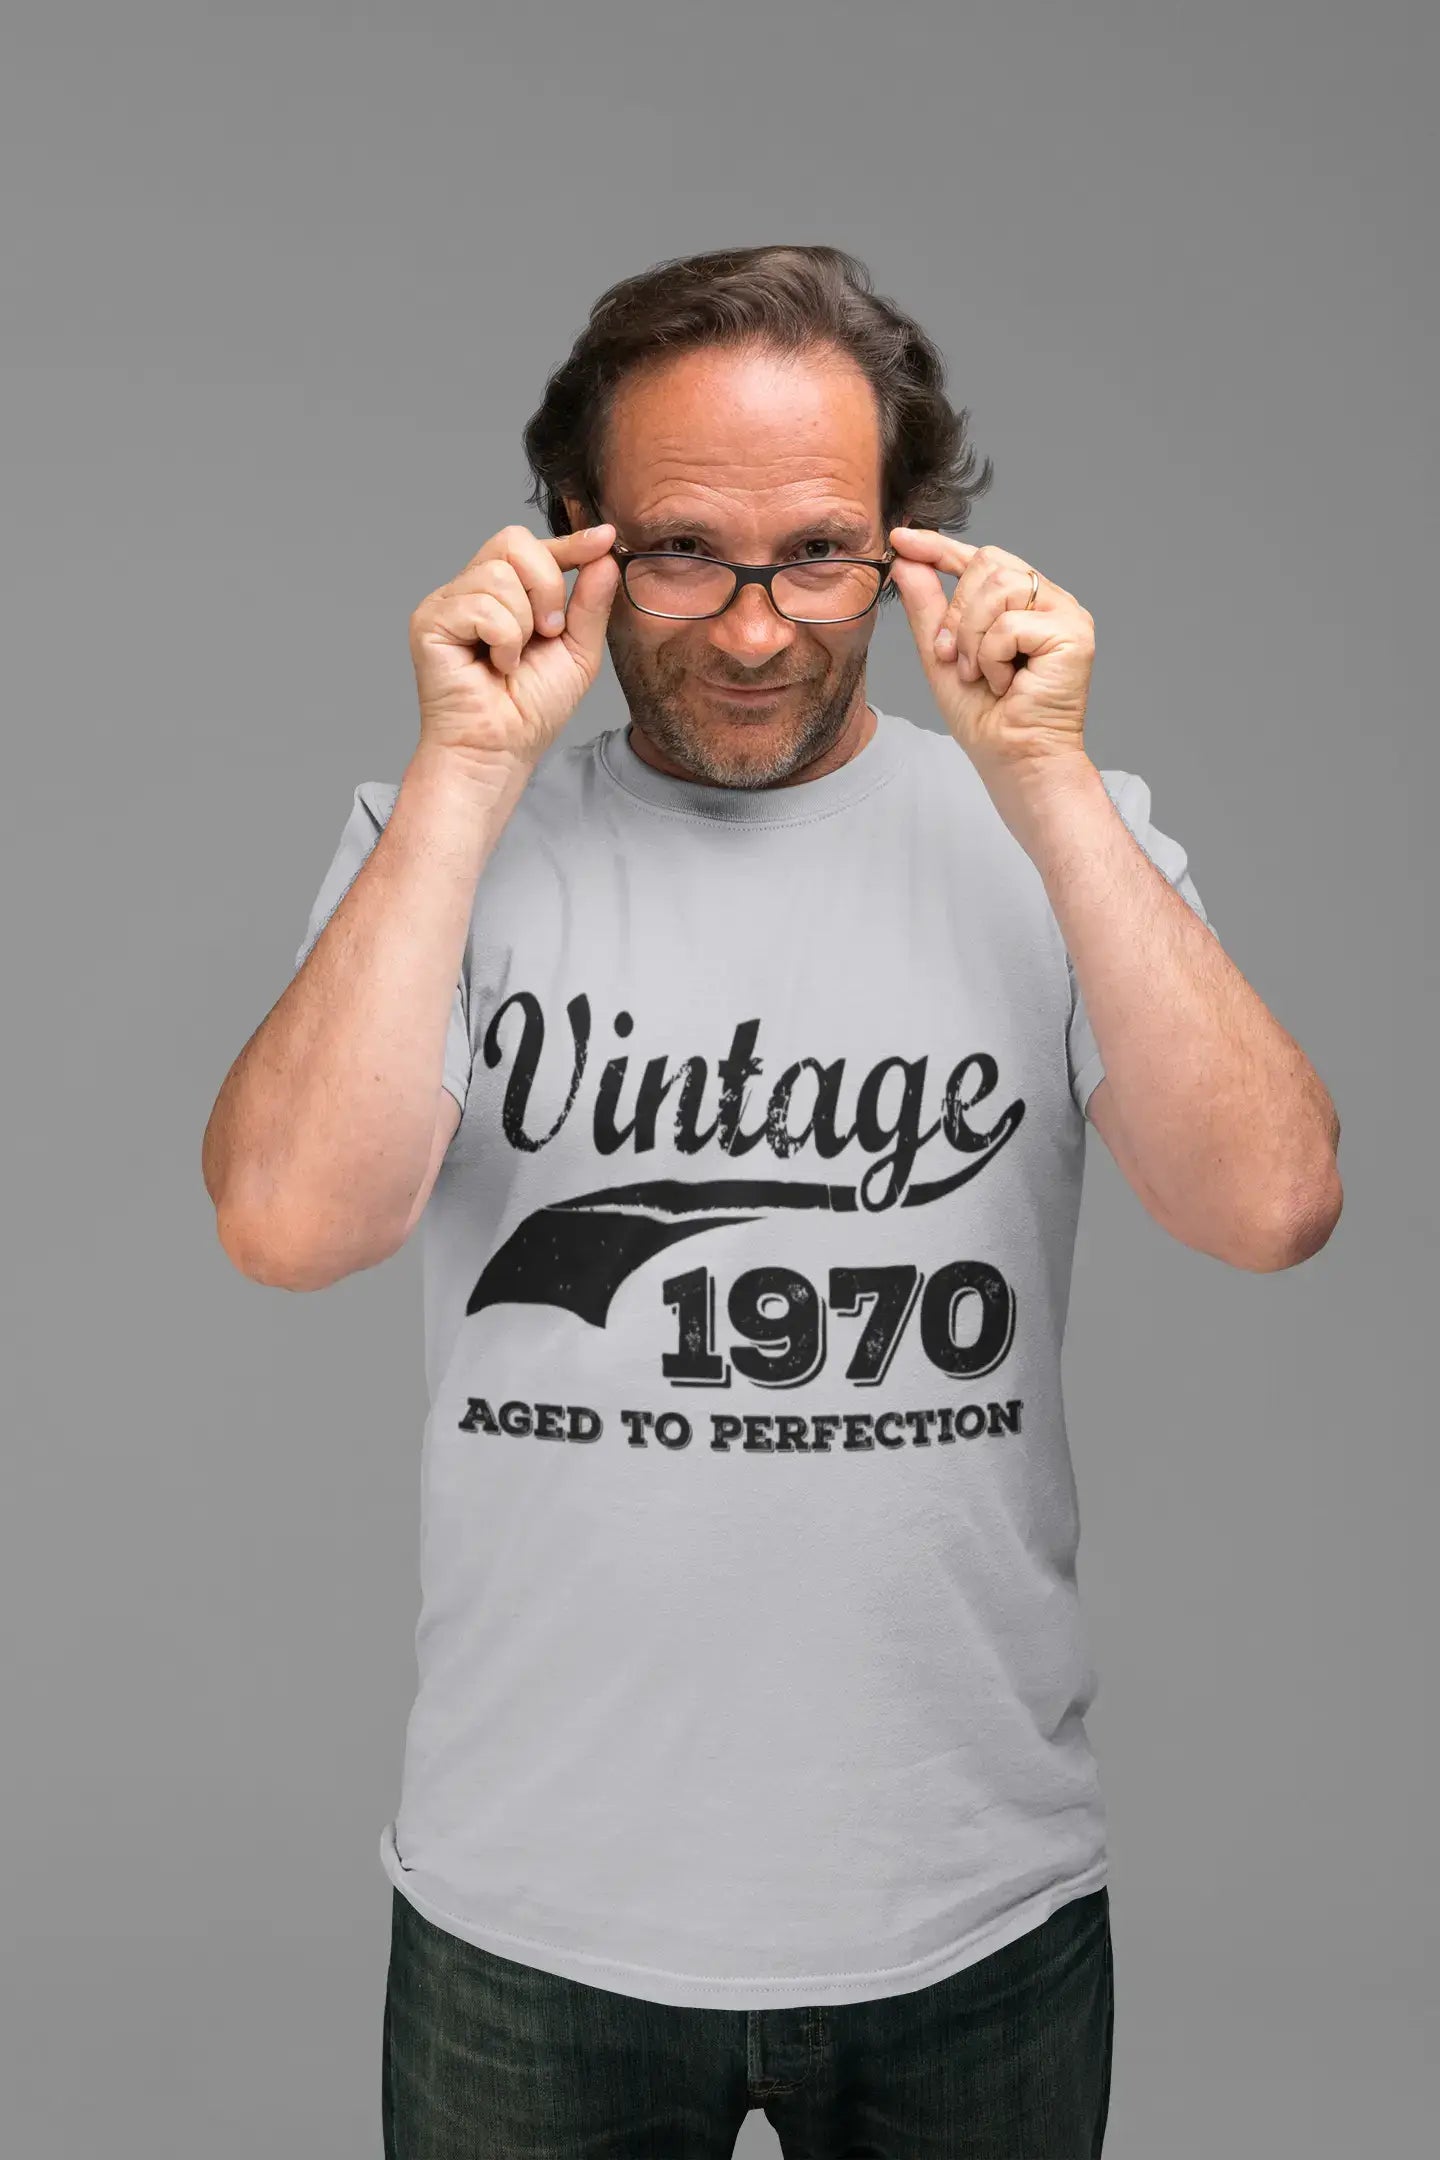 Vintage Aged to Perfection 1970, Grey, Men's Short Sleeve Round Neck T-shirt, gift t-shirt 00346